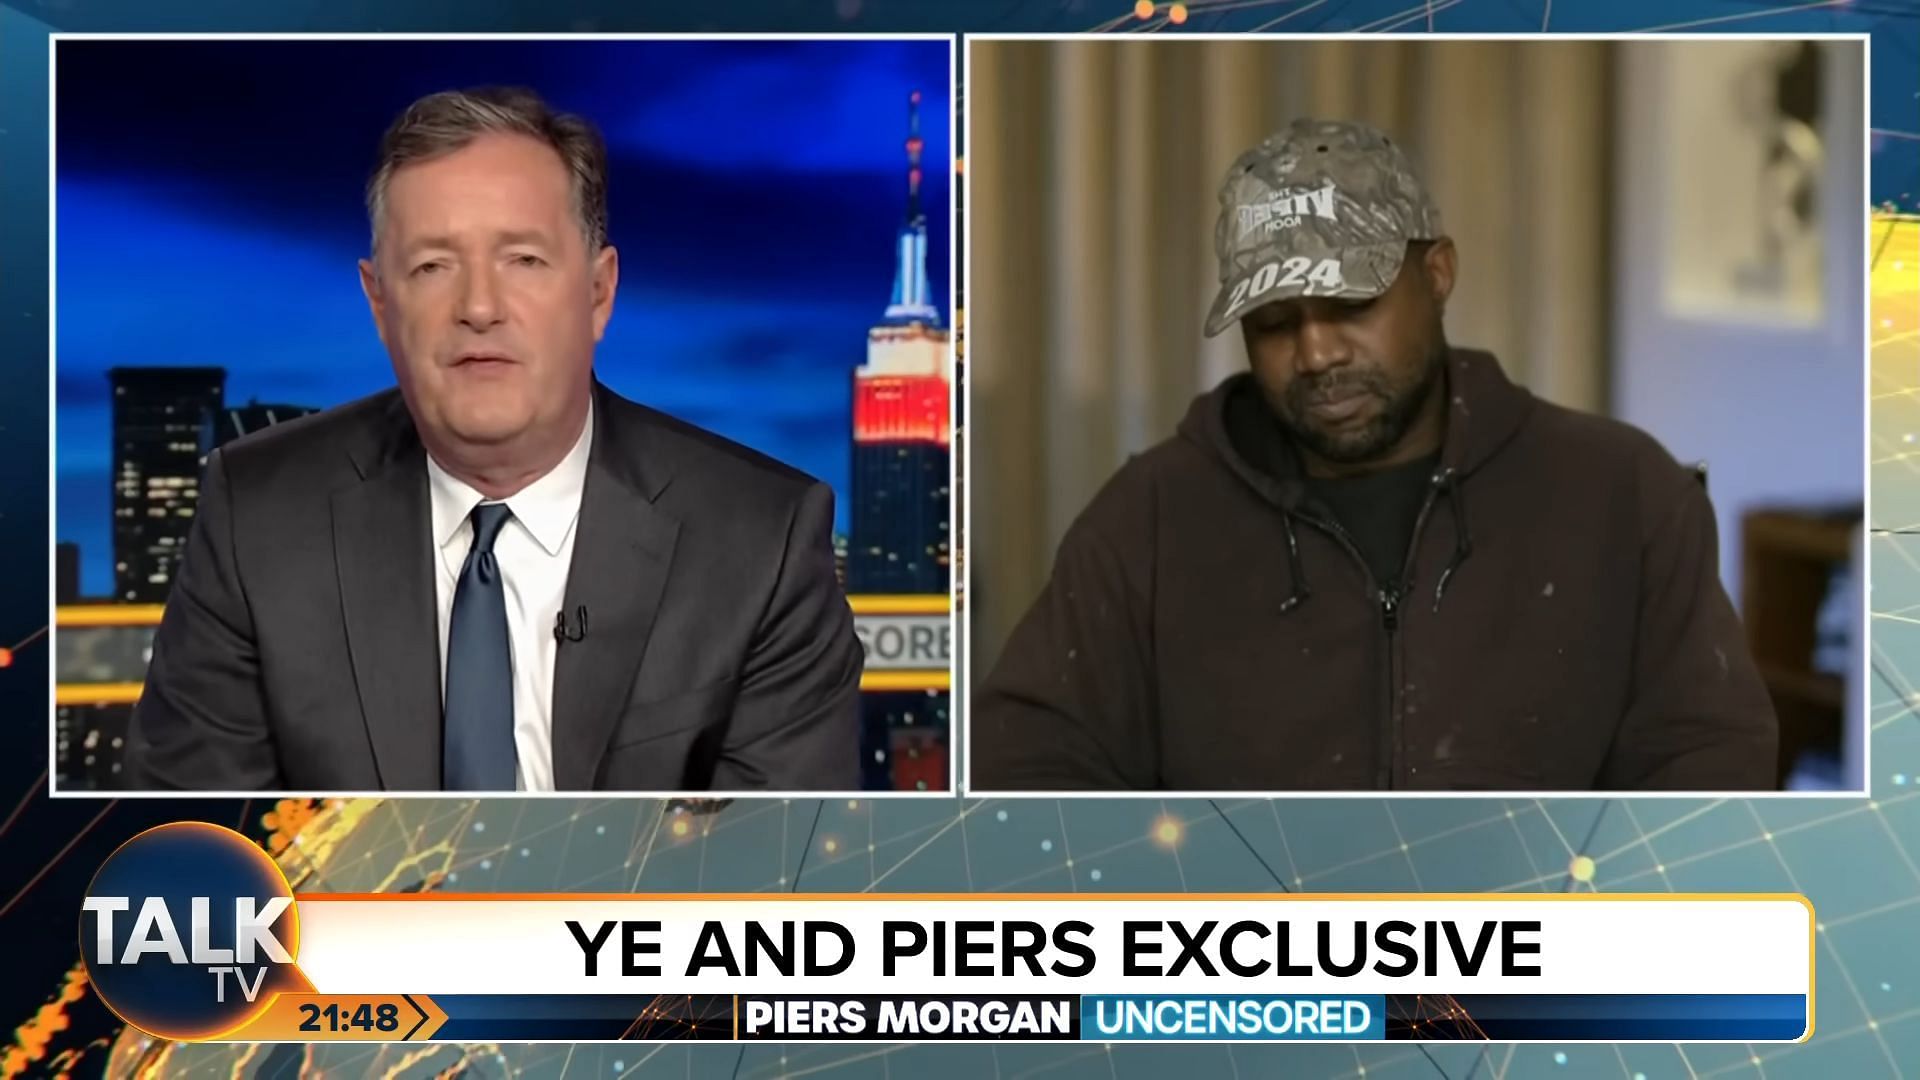 Kanye West appeared on Piers Morgan Uncensored (Image via YouTube/Piers Morgan Uncensored)